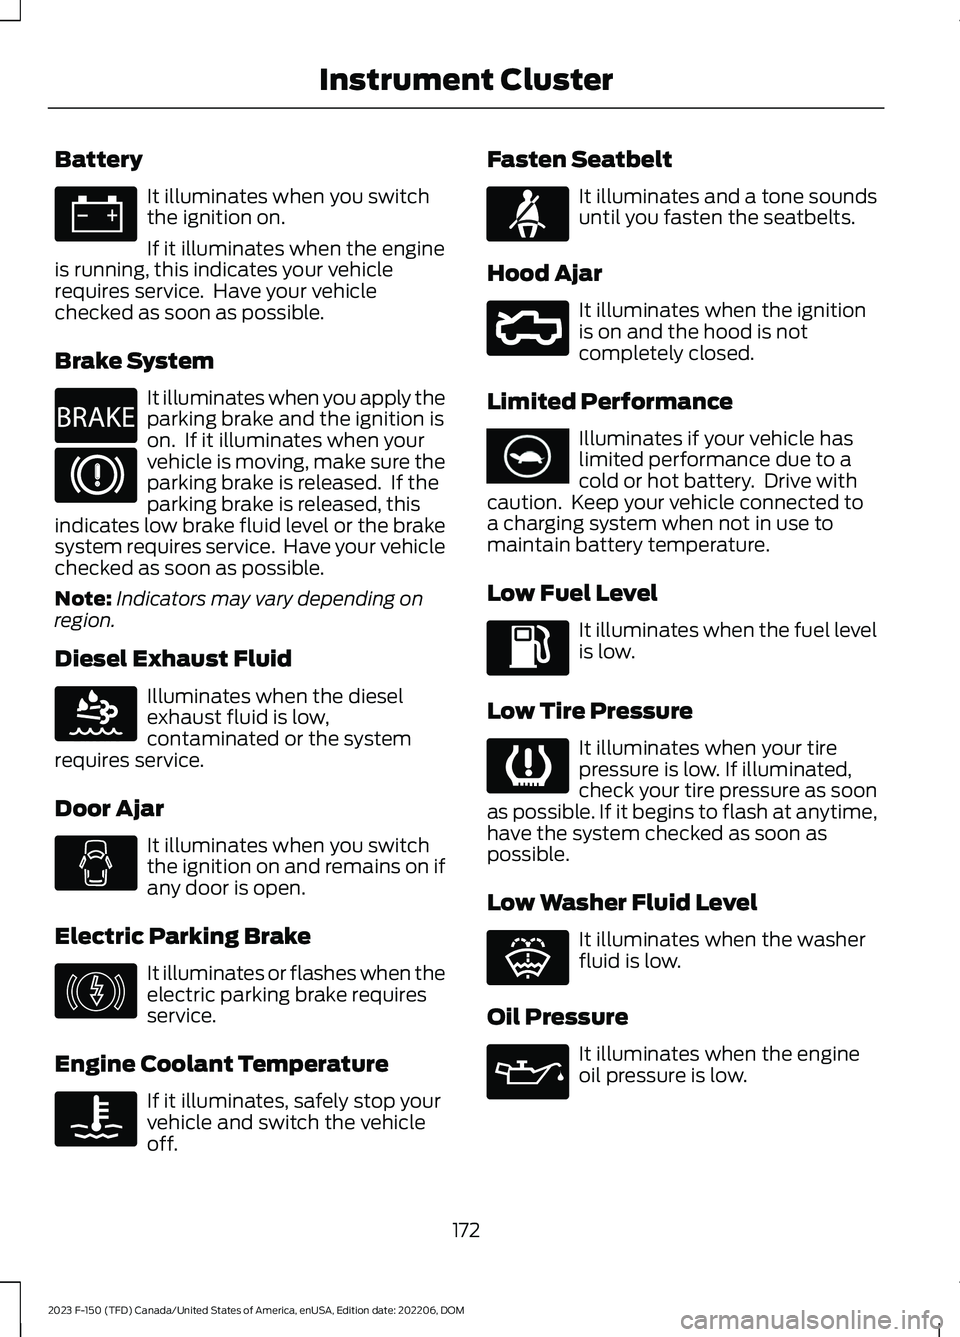 FORD F150 2023  Owners Manual Battery
It illuminates when you switchthe ignition on.
If it illuminates when the engineis running, this indicates your vehiclerequires service.  Have your vehiclechecked as soon as possible.
Brake Sy